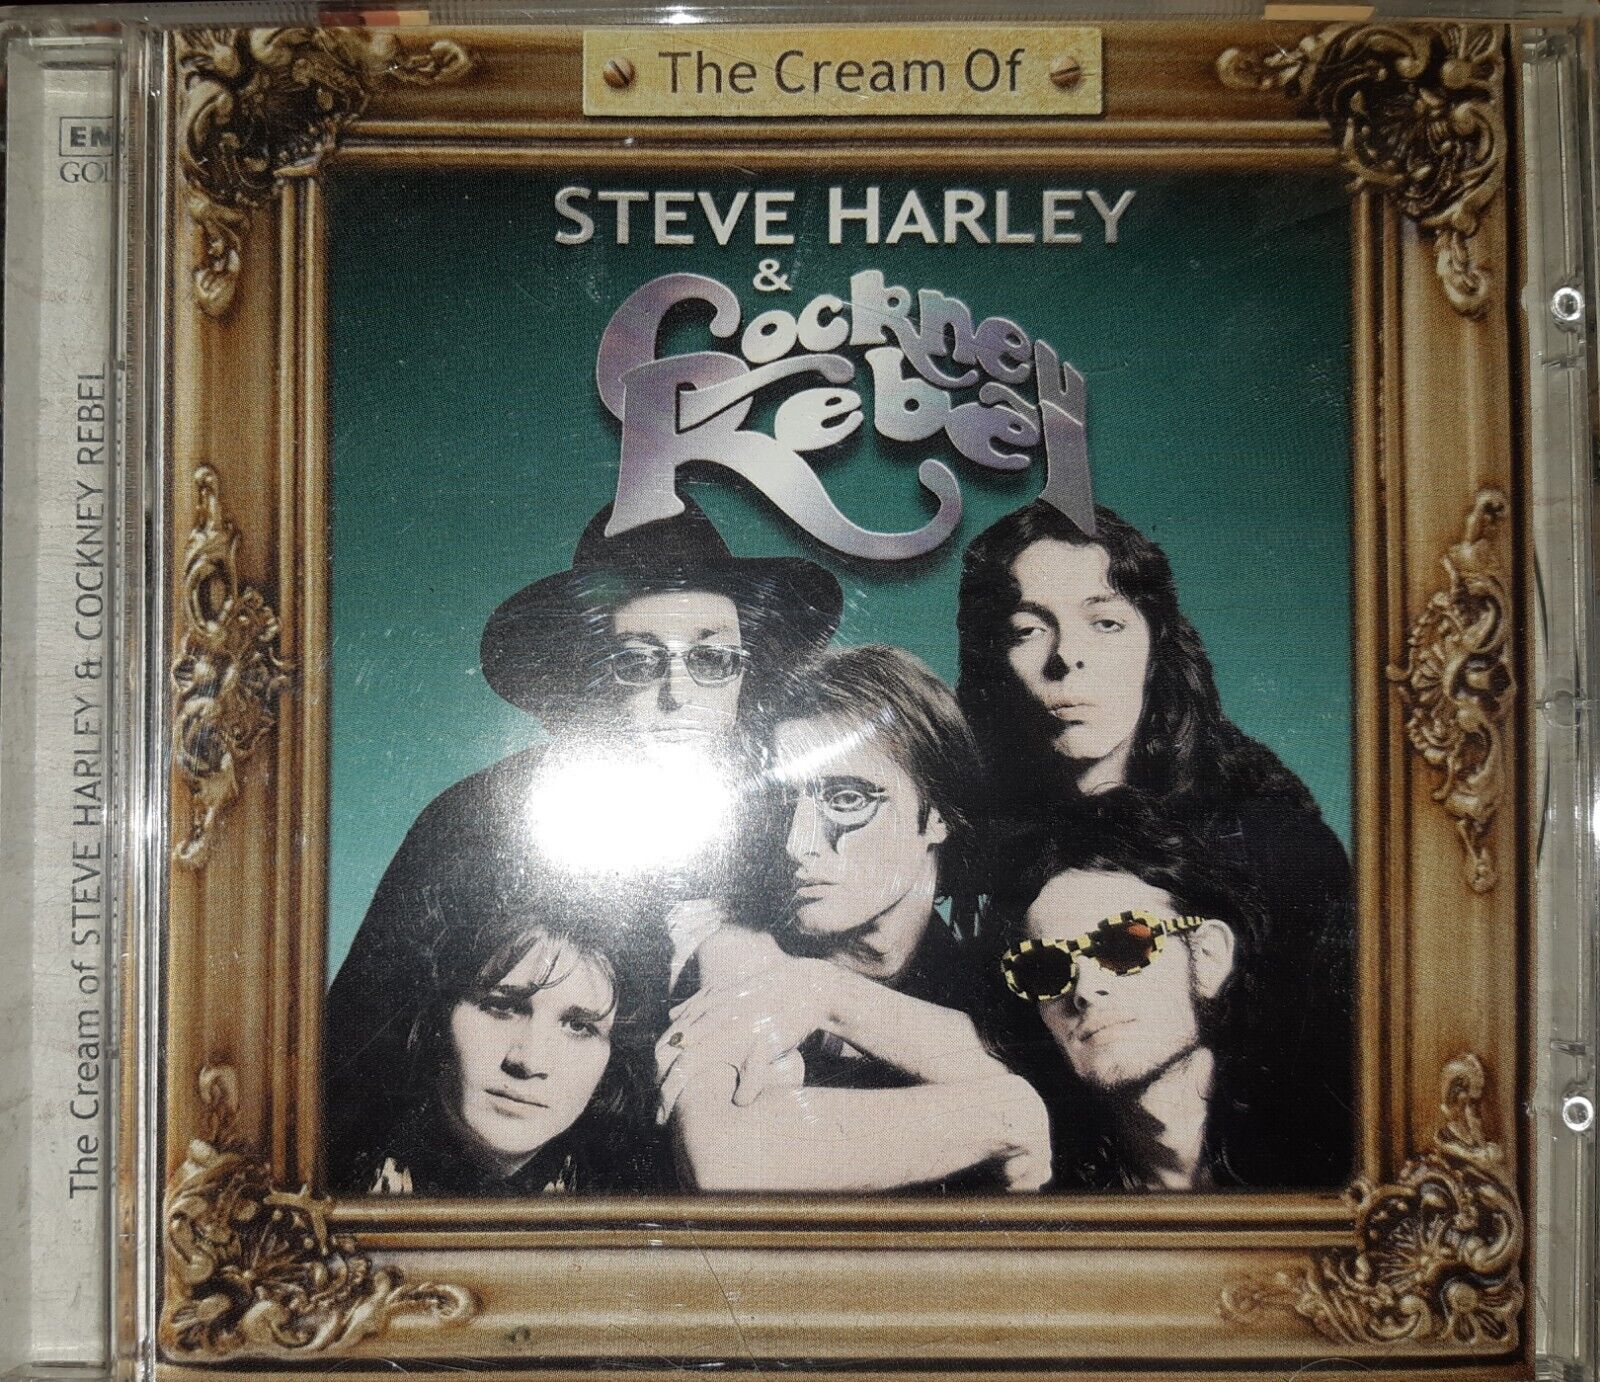 Steve Harley & Cockney Rebel - The Cream Of. CD. Near Mint Used Condition. 